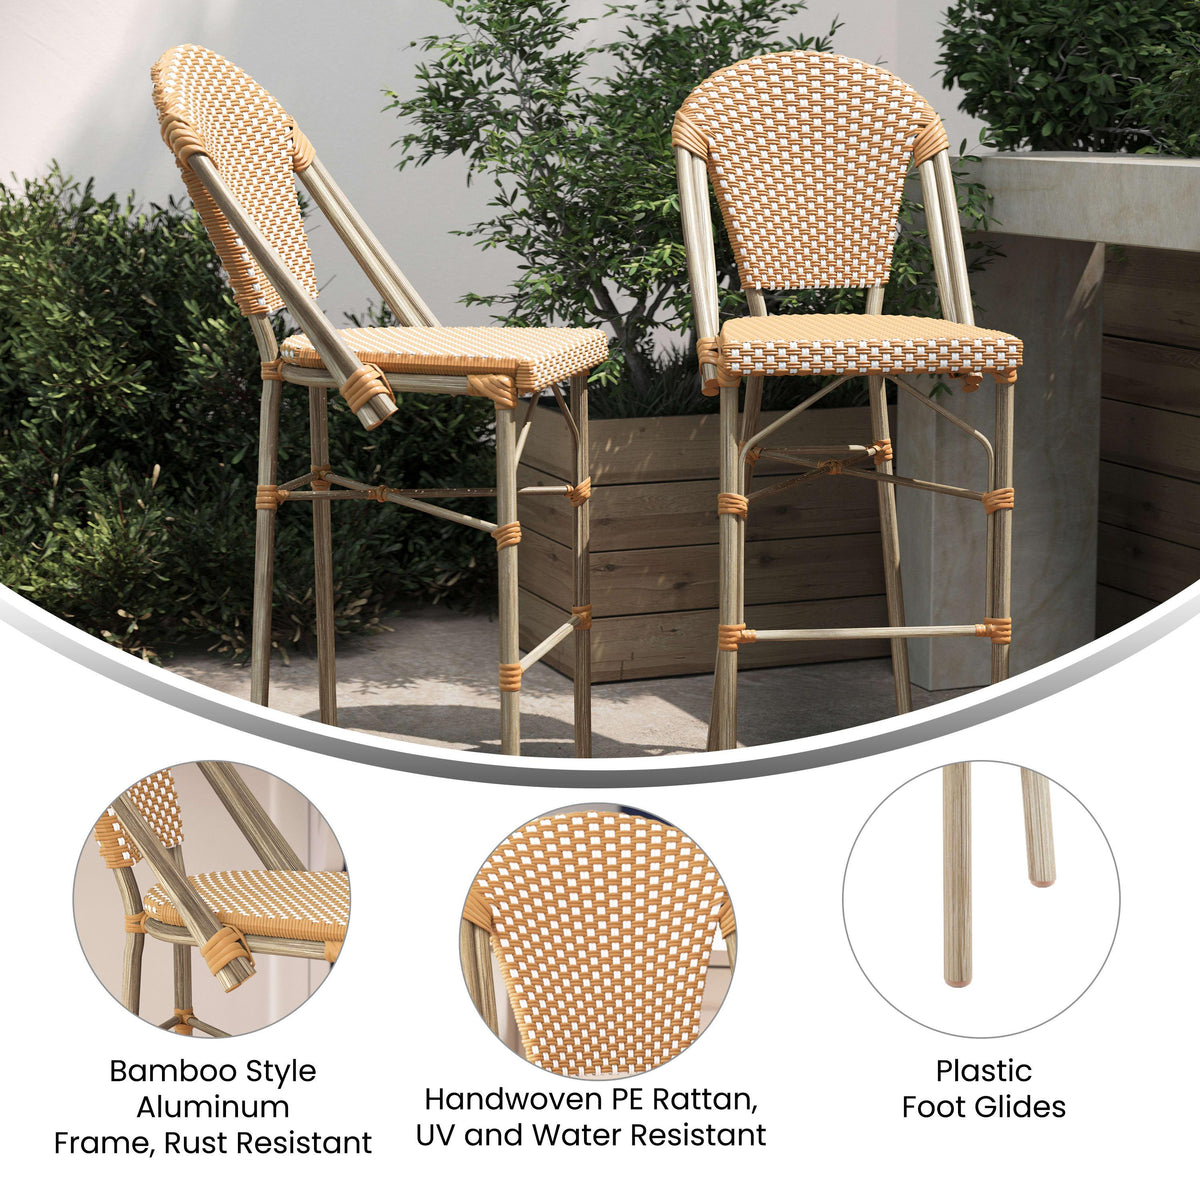 Natural & White/Light Natural Frame |#| 2 Pack All-Weather Commercial Paris Stools with Bamboo Print Frame-Natural/White